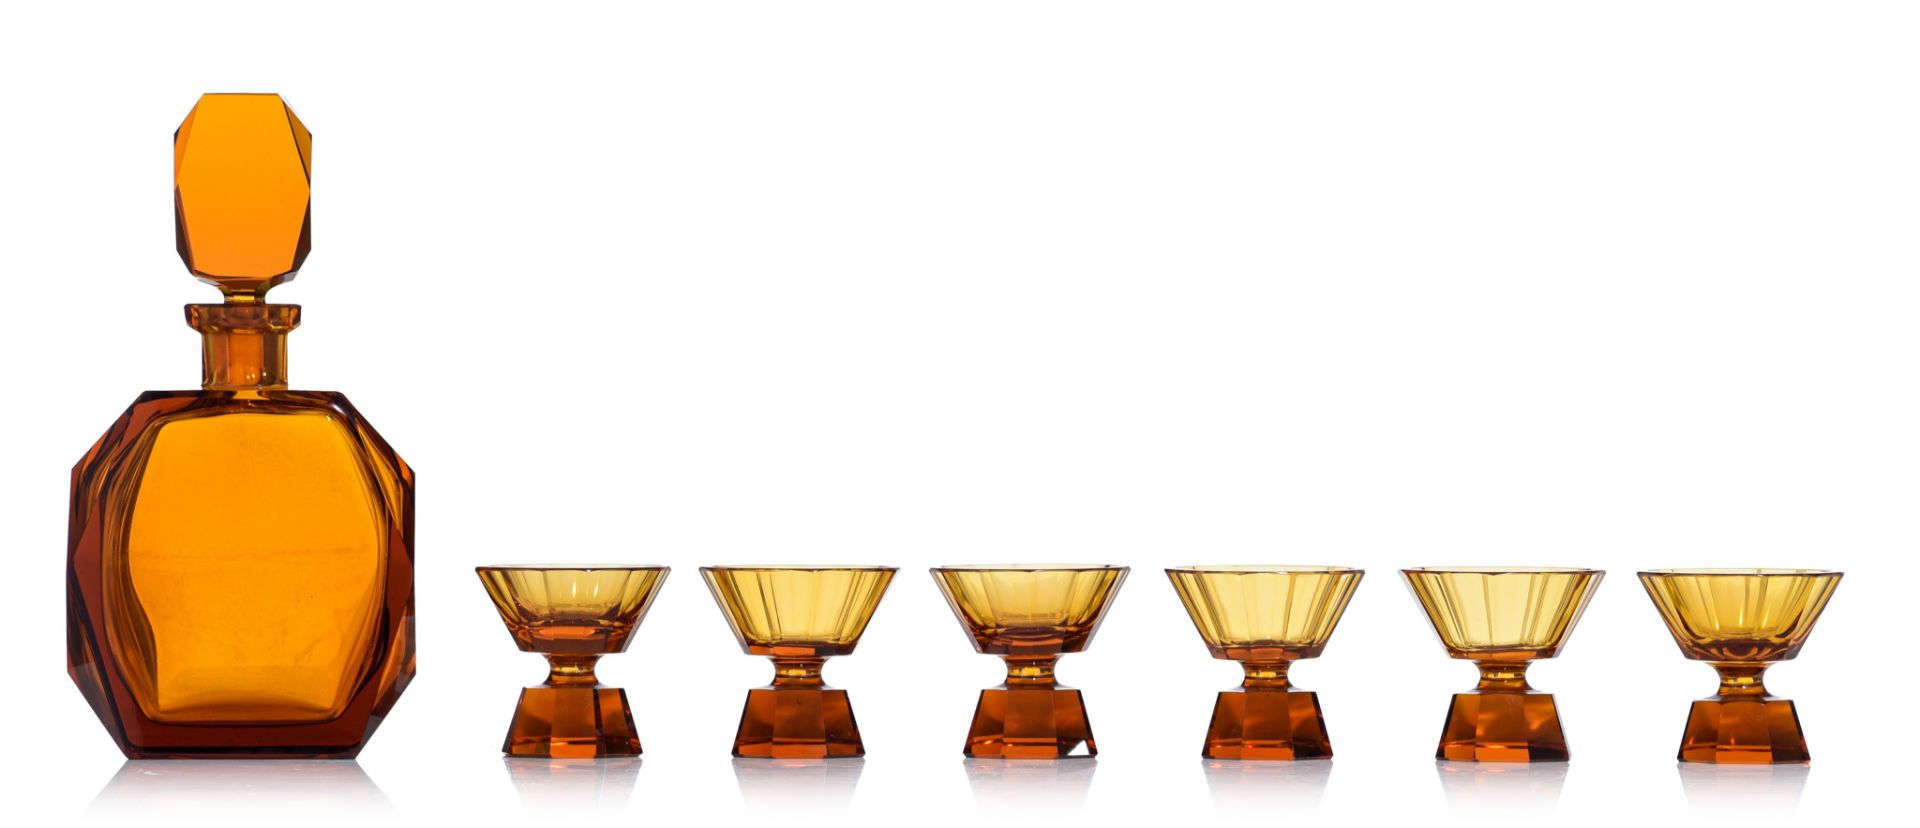 (BIDDING ONLY ON CARLOBONTE.BE) A large collection of various decanters with matching liquor glasses - Image 9 of 25